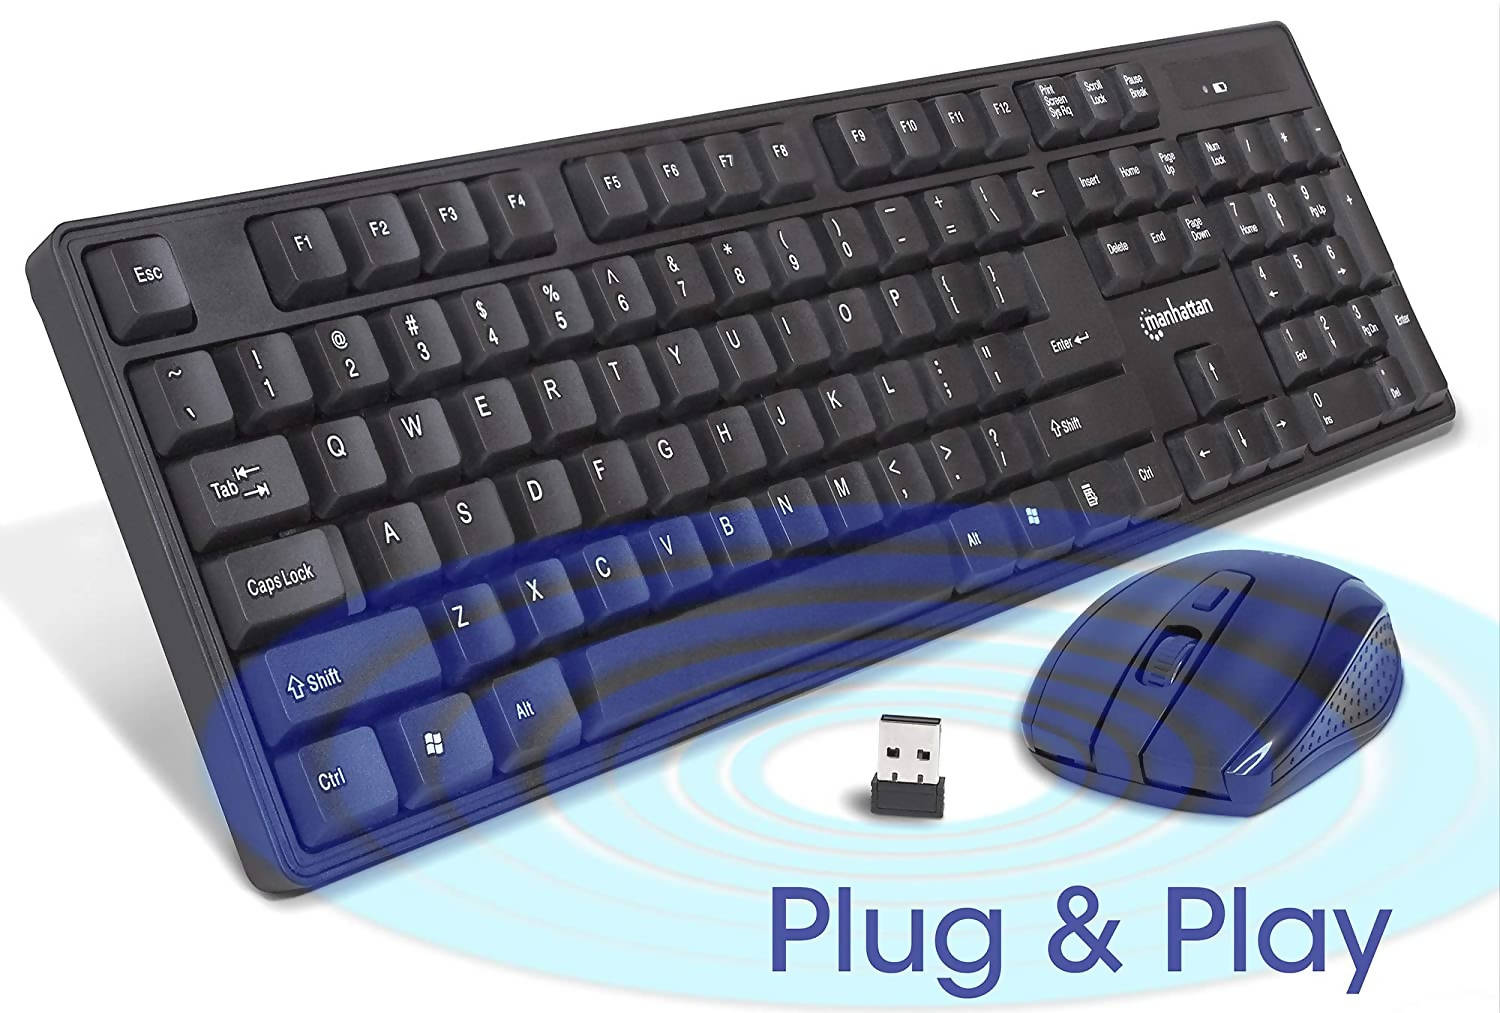 Manhattan Wireless Keyboard and Mouse Combo